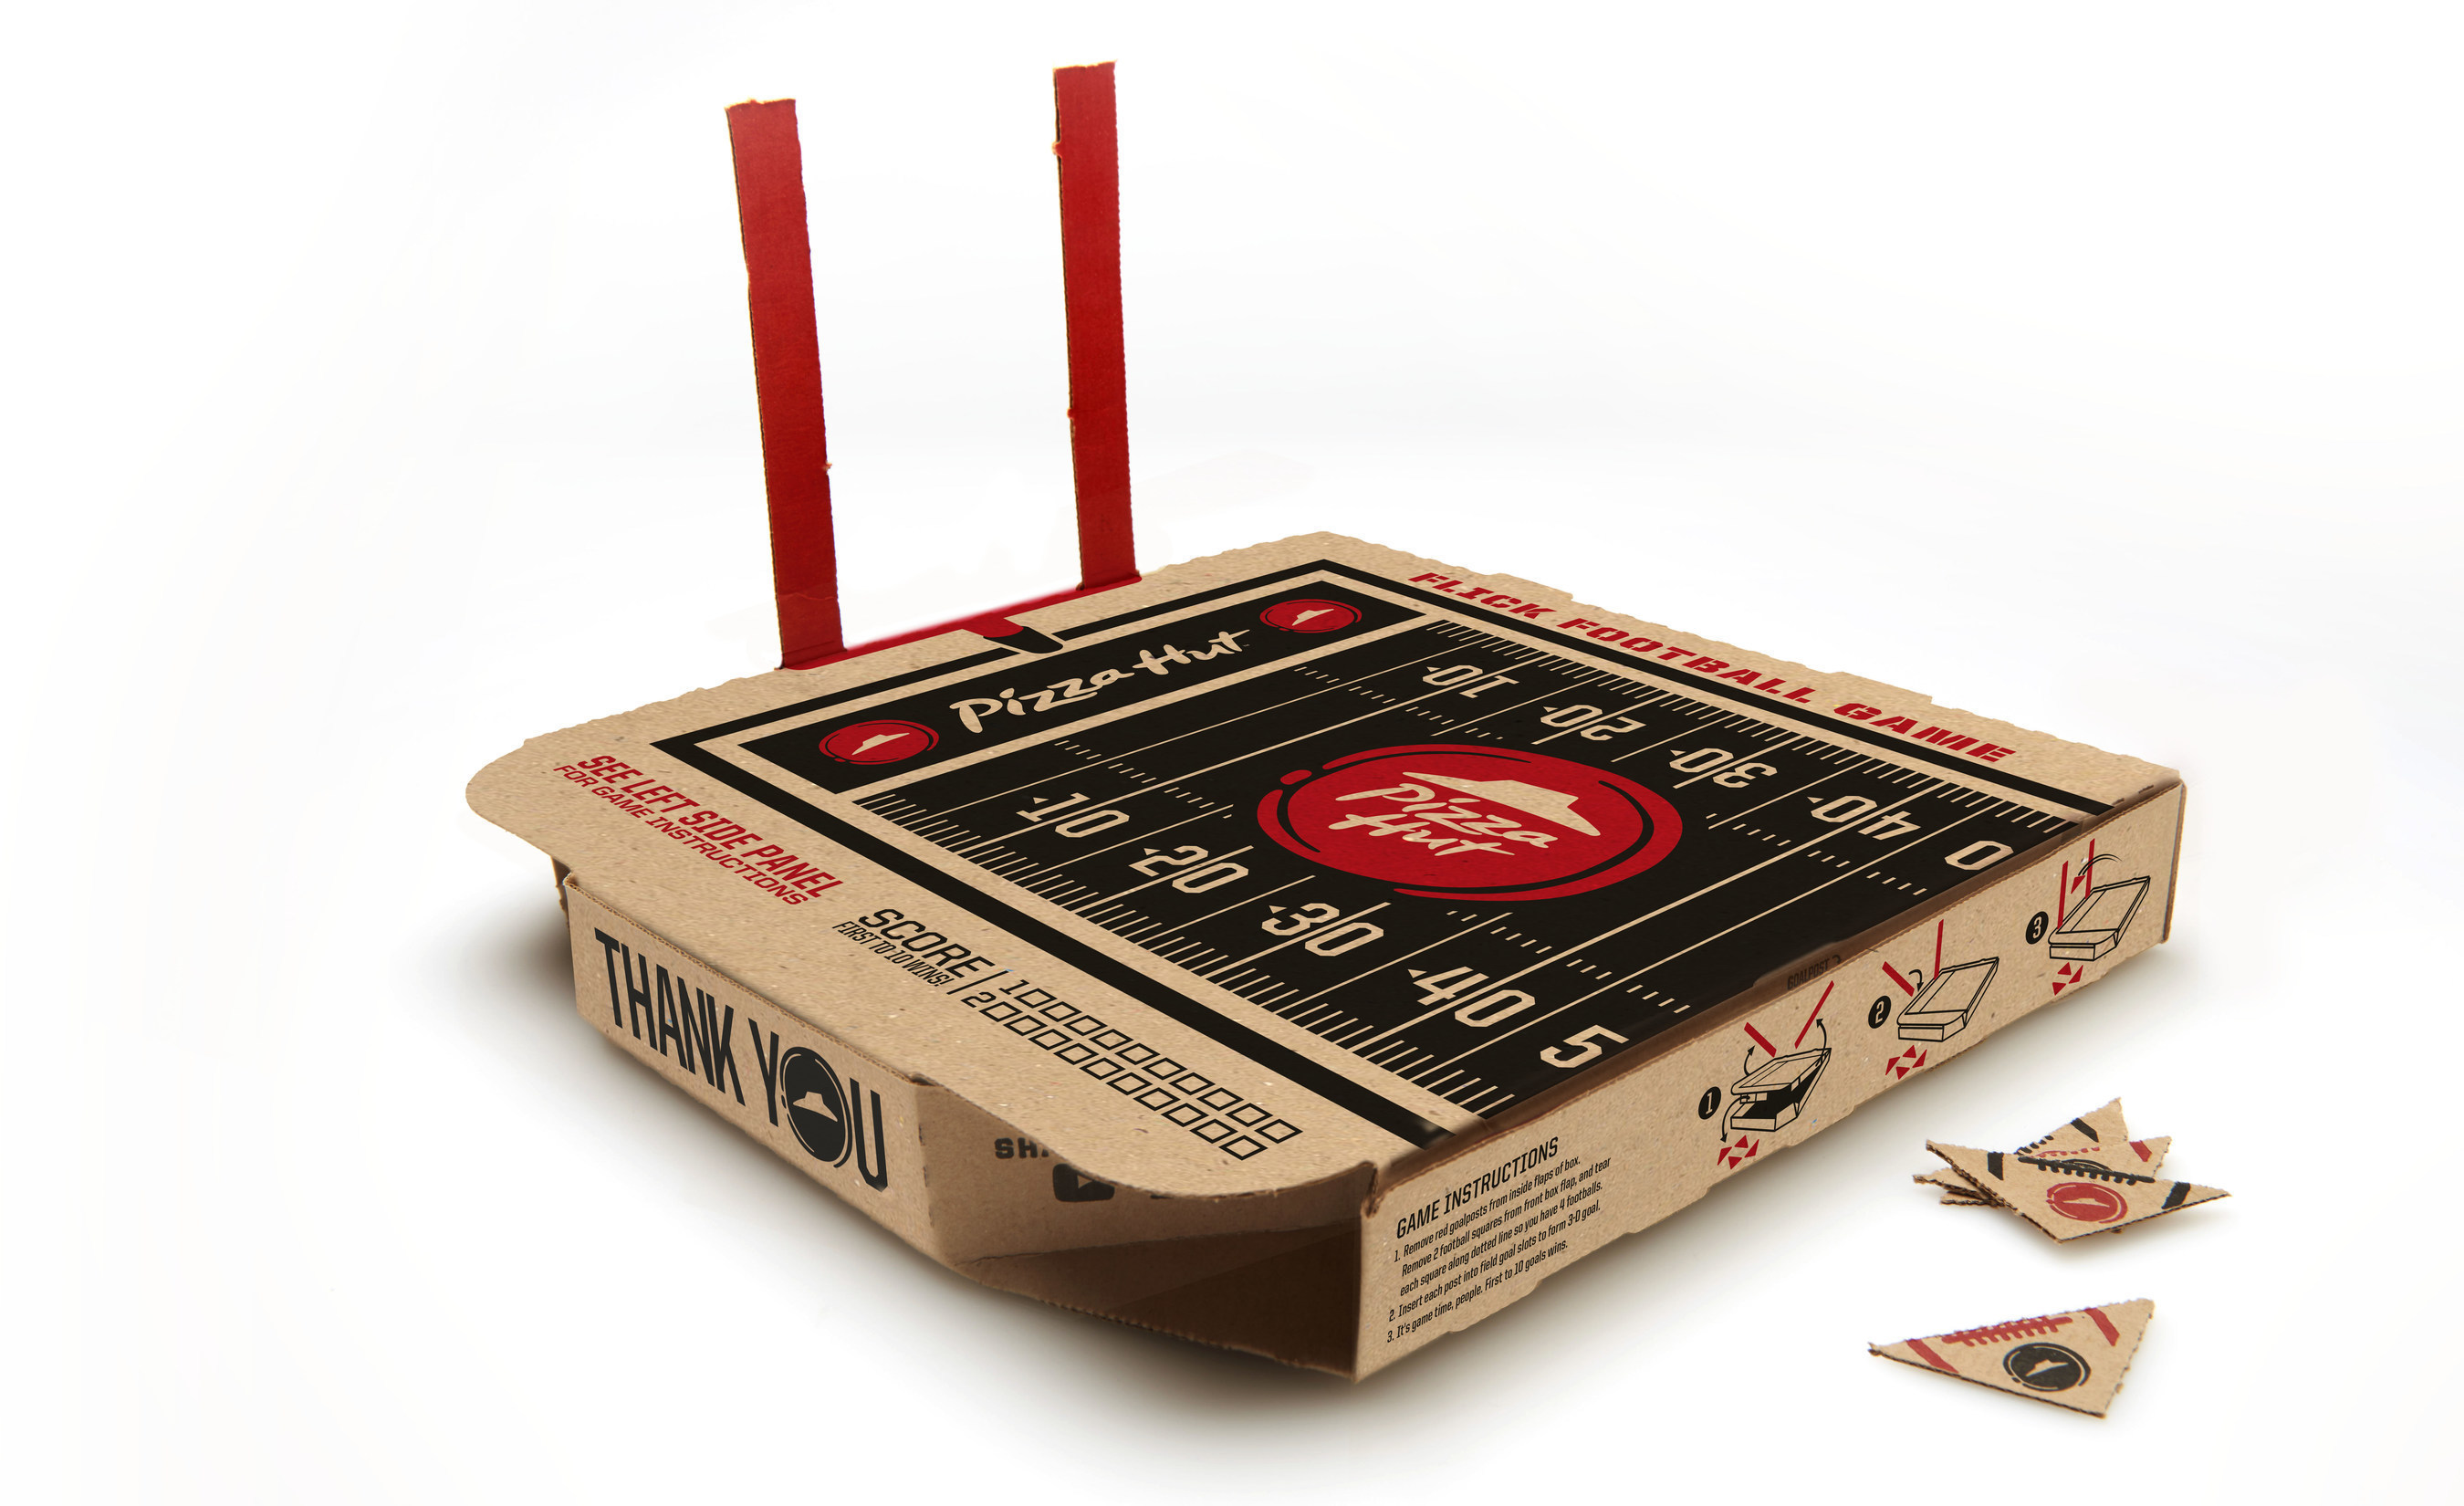 Pizza Hut, recognized as the pizza restaurant which serves and delivers more pizzas than any other pizza restaurant in the world, is introducing an all-new pizza box that features a playable Flick Football Field on top. The box is available with purchase of any medium pizza, including a one-topping medium pizza off the Pizza Hut $5 Flavor Menu.